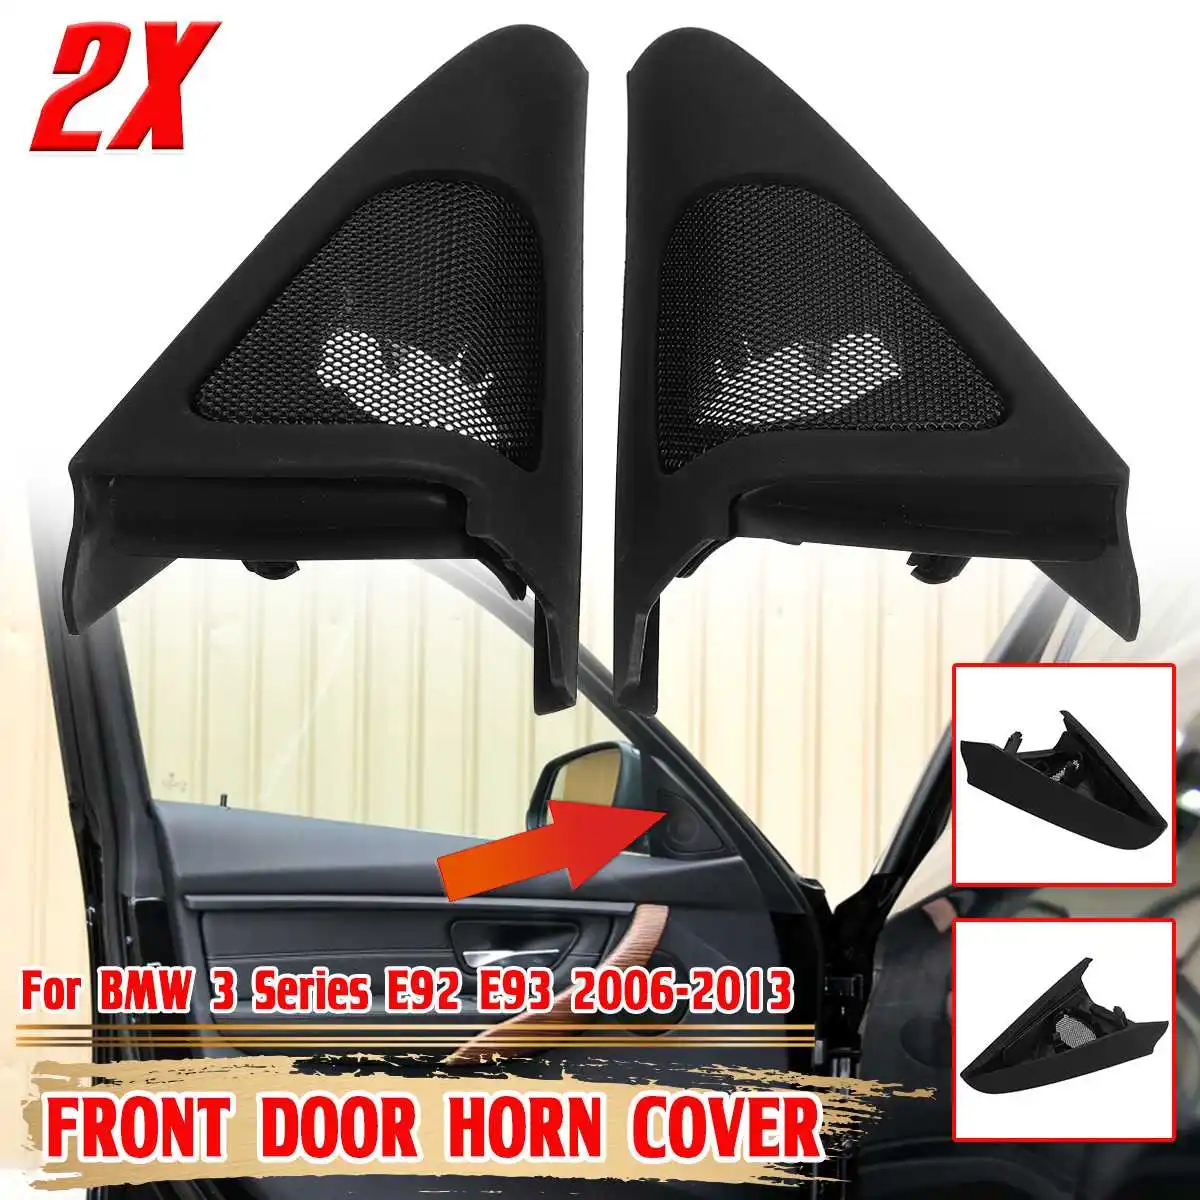 

High Quality Car Tweeter Covers For BMW 3 Series E92 E93 2006-2013 Car Front Door Speakers Audio Trumpet Cover Trim With Foam